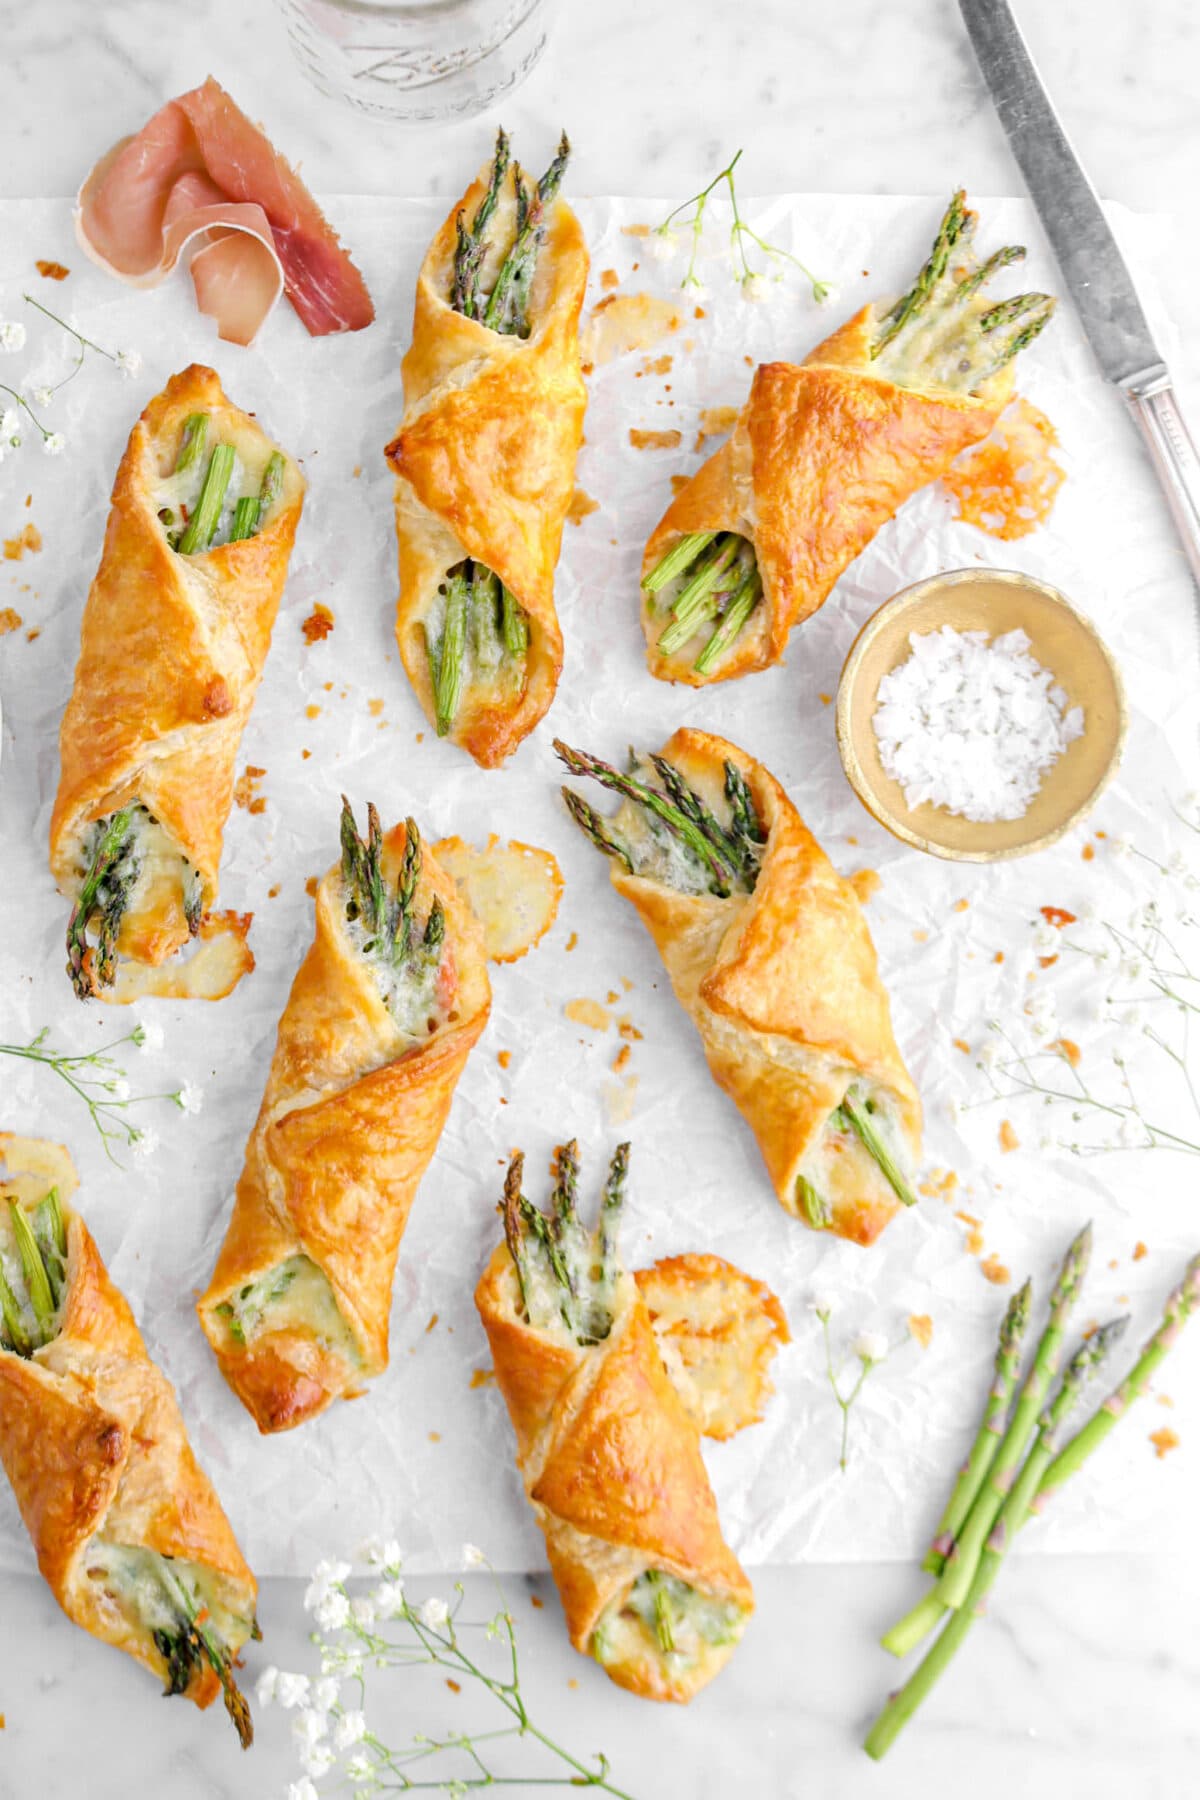 seven pastry bundles on parchment paper with melted cheese, pastry crumbs, flowers, a knife, a piece of prosciutto, and fresh asparagus.